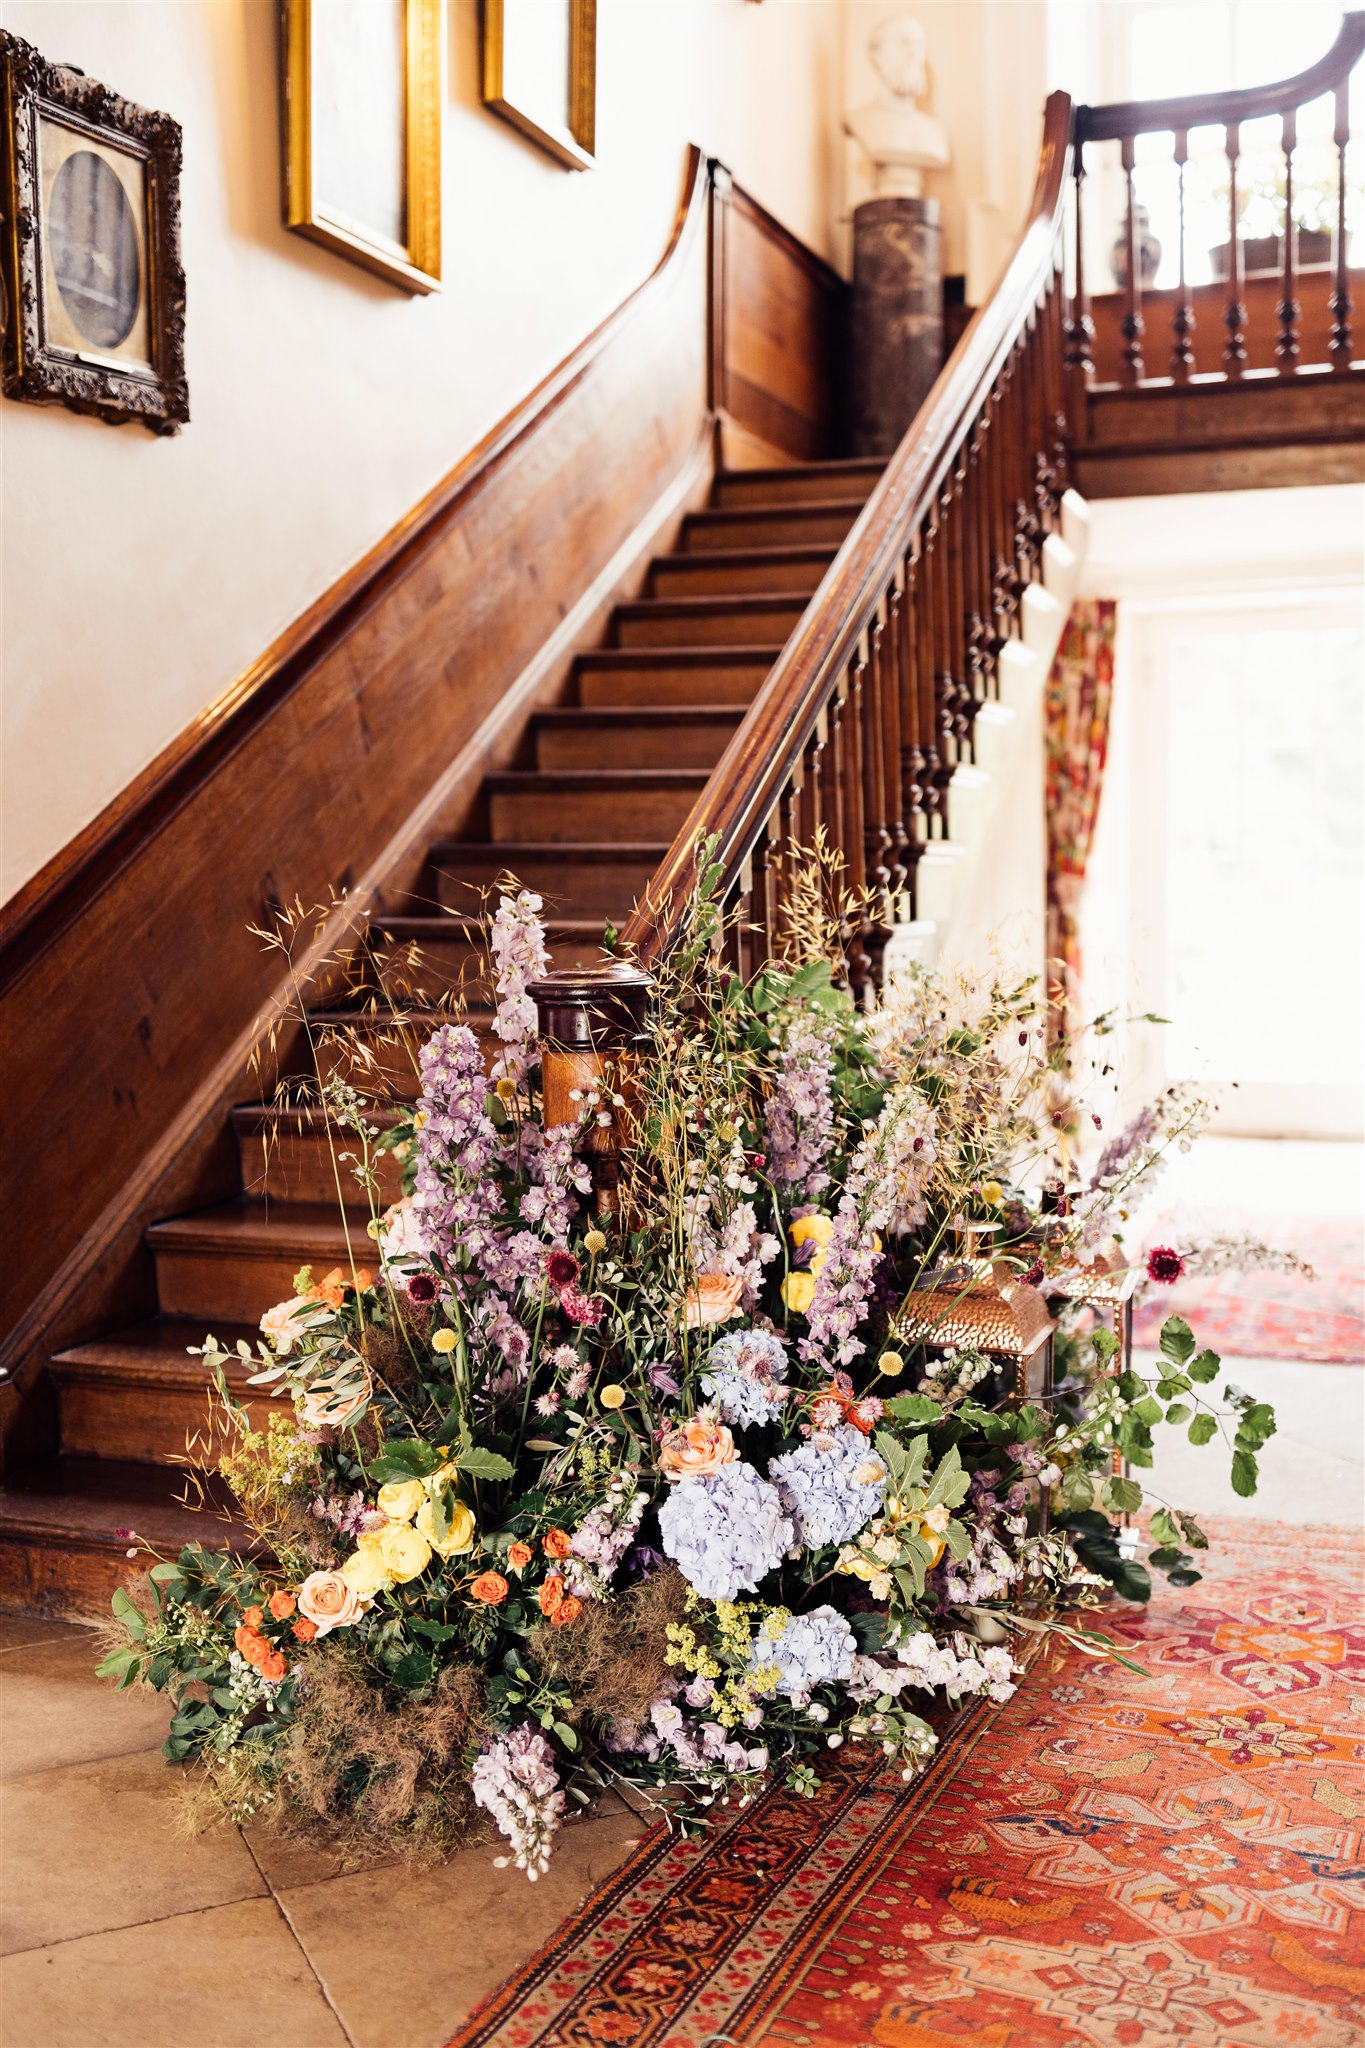 A floor floral arrangement filled with green foliage and pink, blue and lilac tones sits next to an old wooden staircase